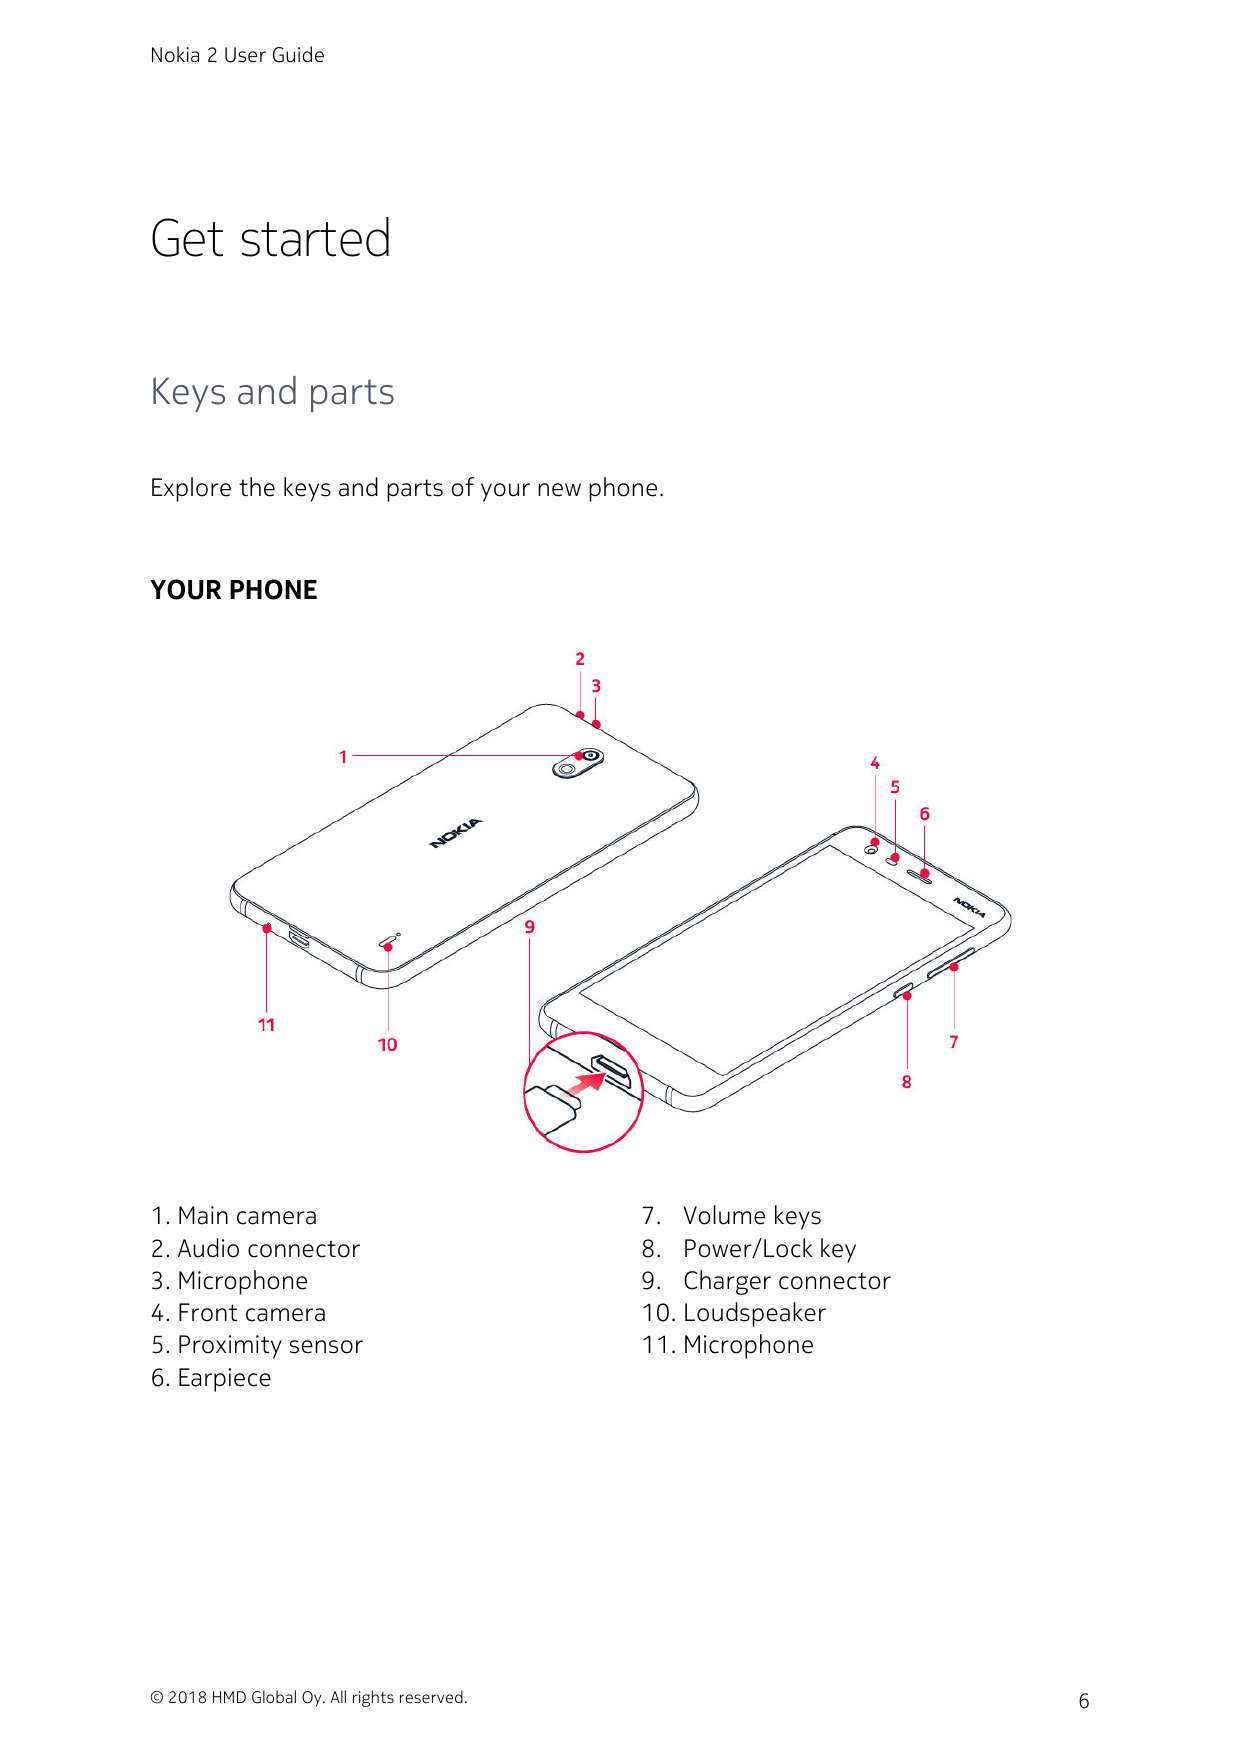 Nokia 2 User GuideGet startedKeys and partsExplore the keys and parts of your new phone.YOUR PHONE1. Main camera2. Audio connect